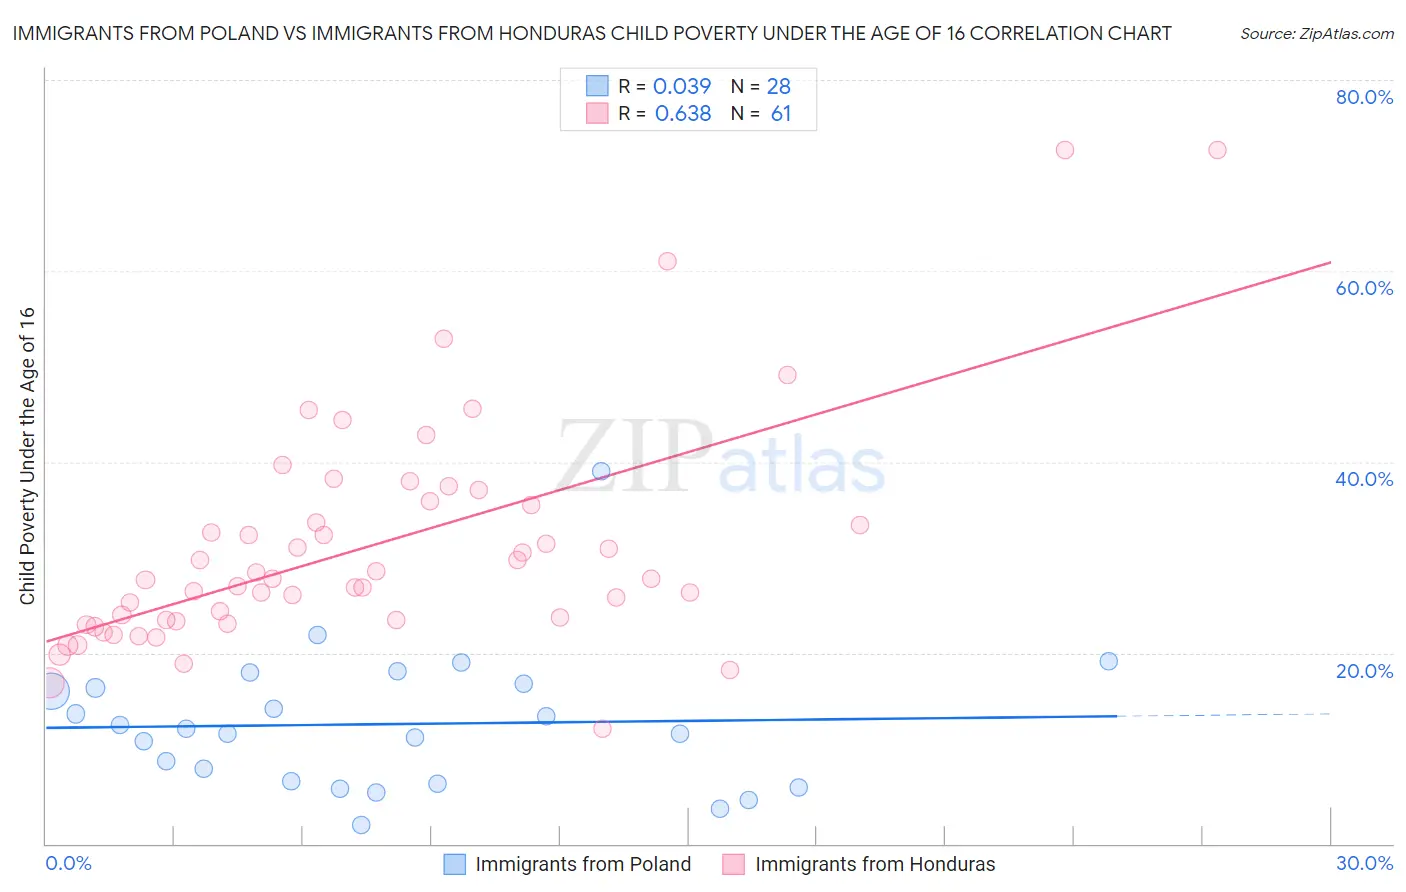 Immigrants from Poland vs Immigrants from Honduras Child Poverty Under the Age of 16